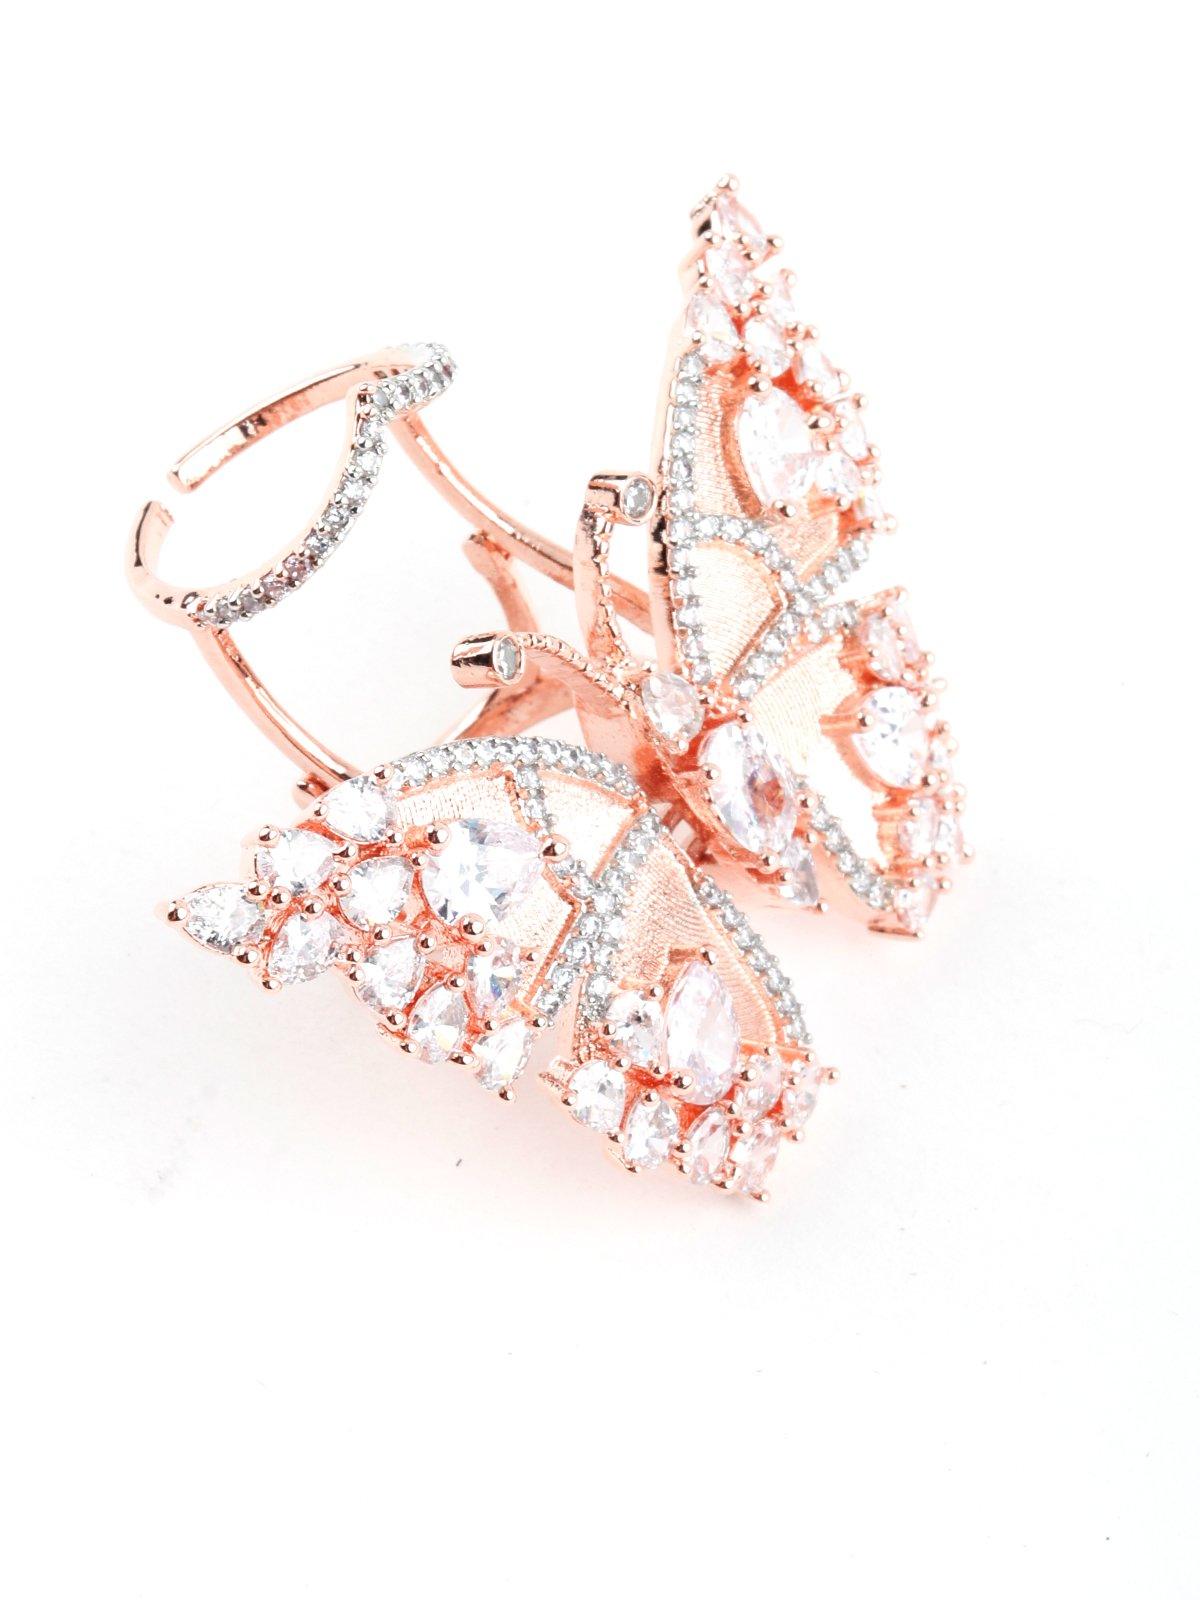 Rose Gold Statement Ring With Rhinestones - Odette